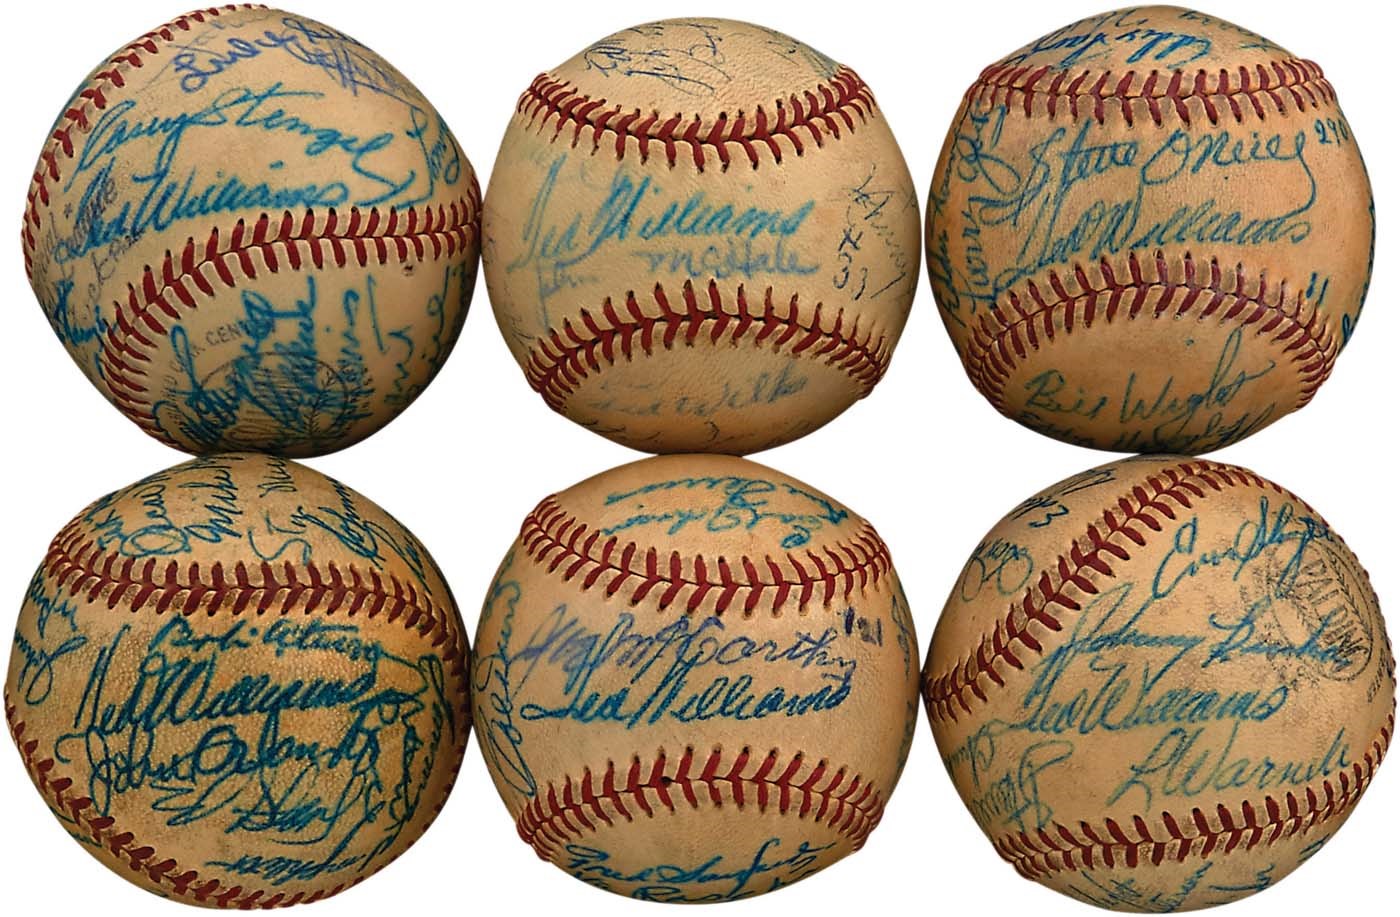 1940s-50s Red Sox Team & HOFers/Stars Signed Baseballs ALL w/Ted Williams (6)